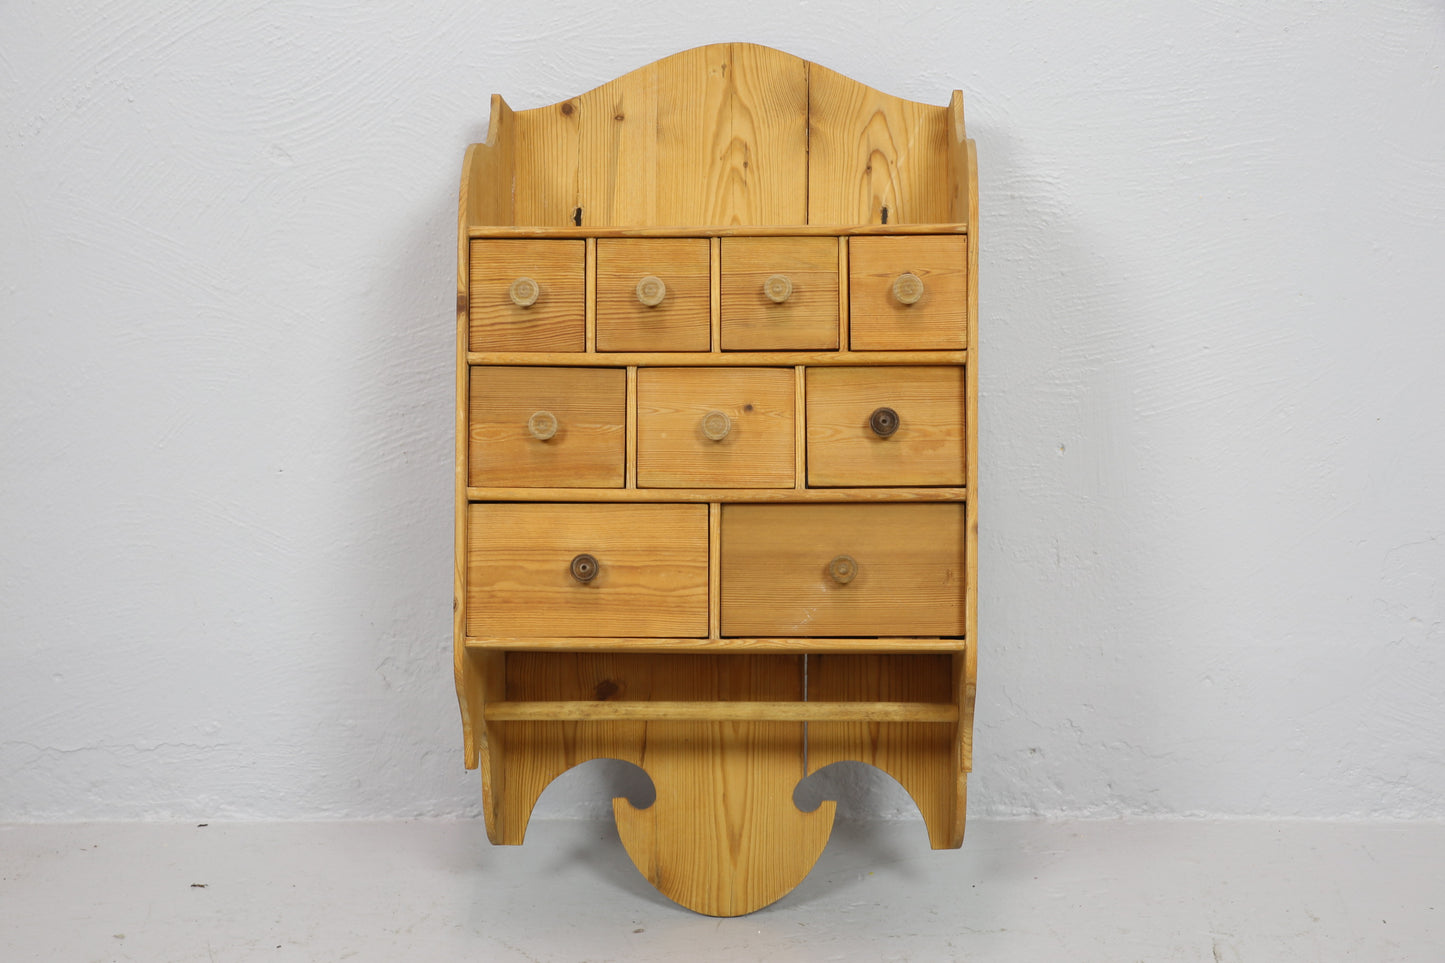 Classic Wooden Wall Shelves with Drawers